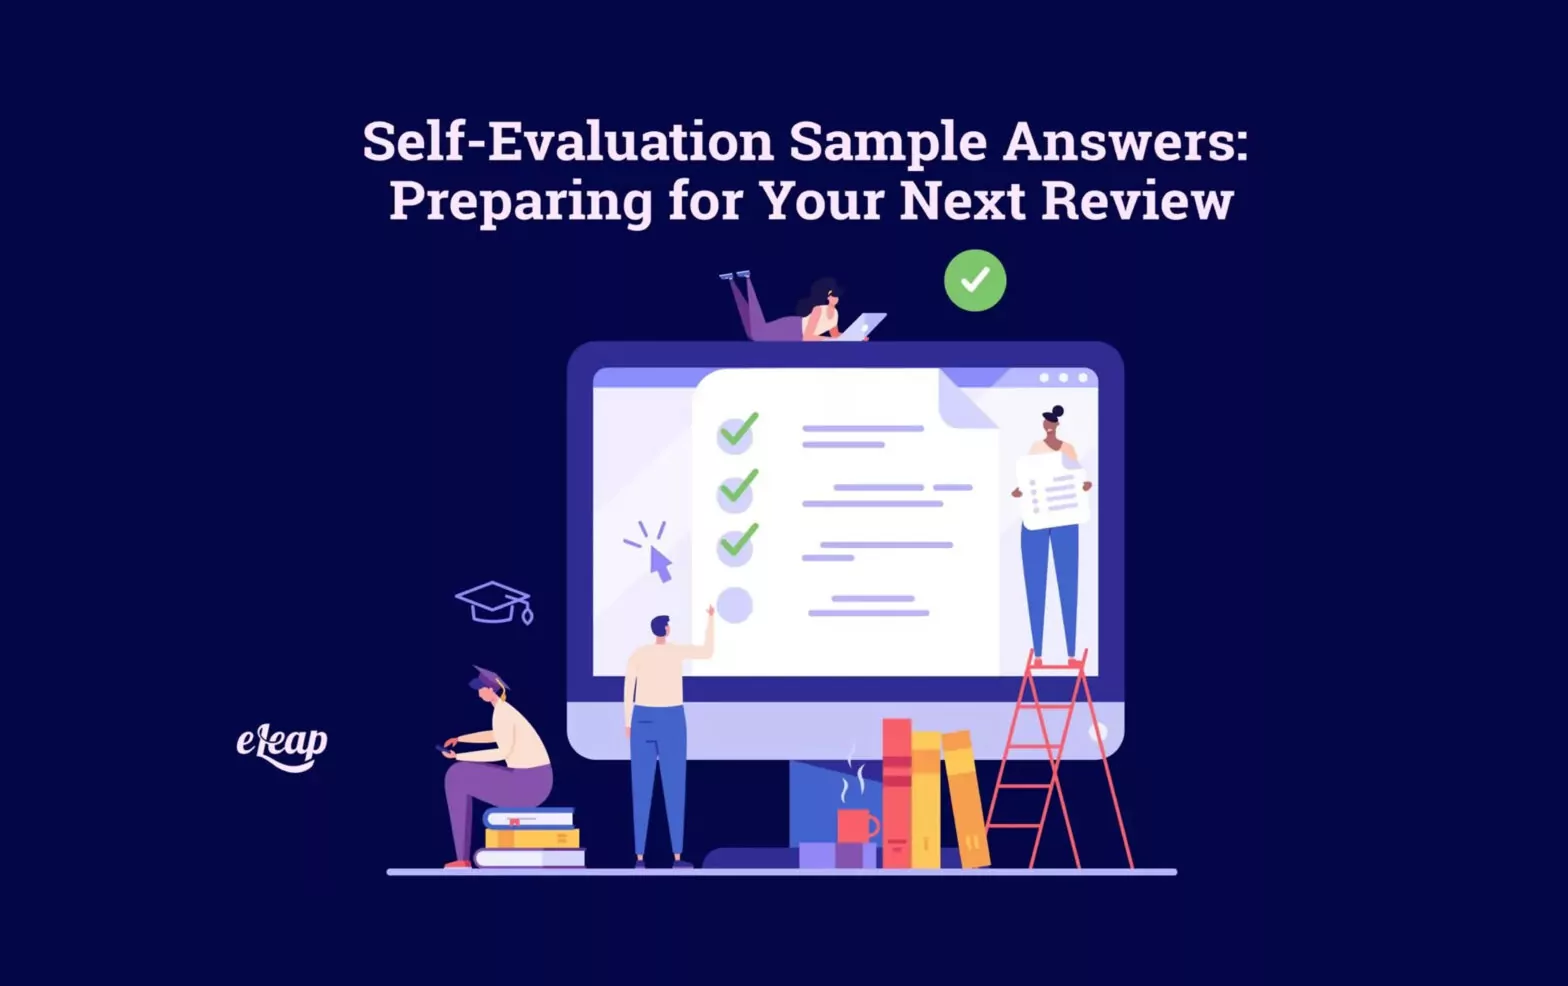 Self-Evaluation Sample Answers: Preparing for Your Next Review